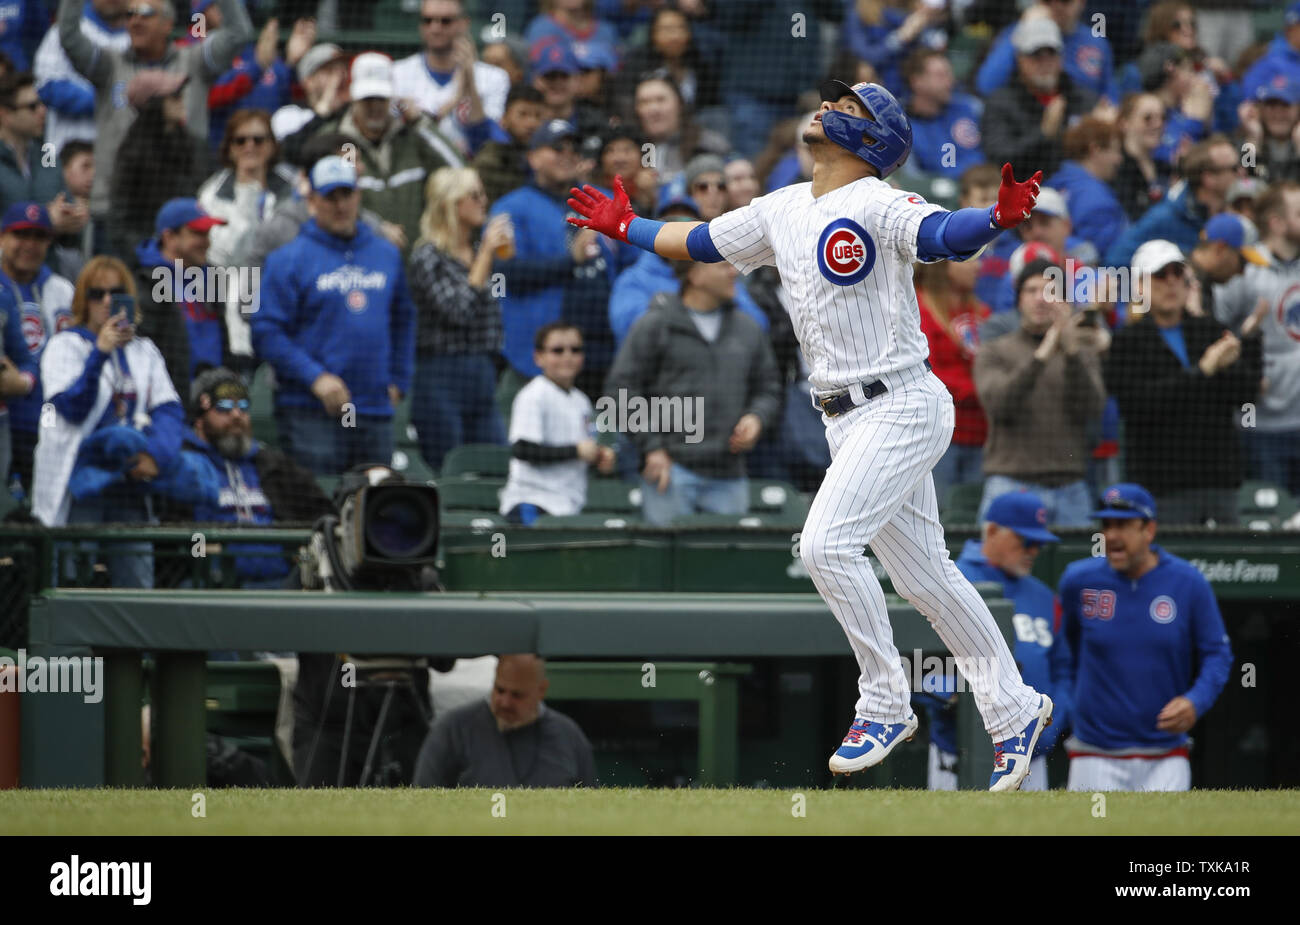 Chicago Cubs catcher Willson Contreras celebrates as he rounds the bases after hitting solo home run off of Los Angeles Angels starting pitcher Tyler Skaggs in the first inning at Wrigley Field on April 12, 2019 in Chicago. Photo by Kamil Krzaczynski/UPI Stock Photo